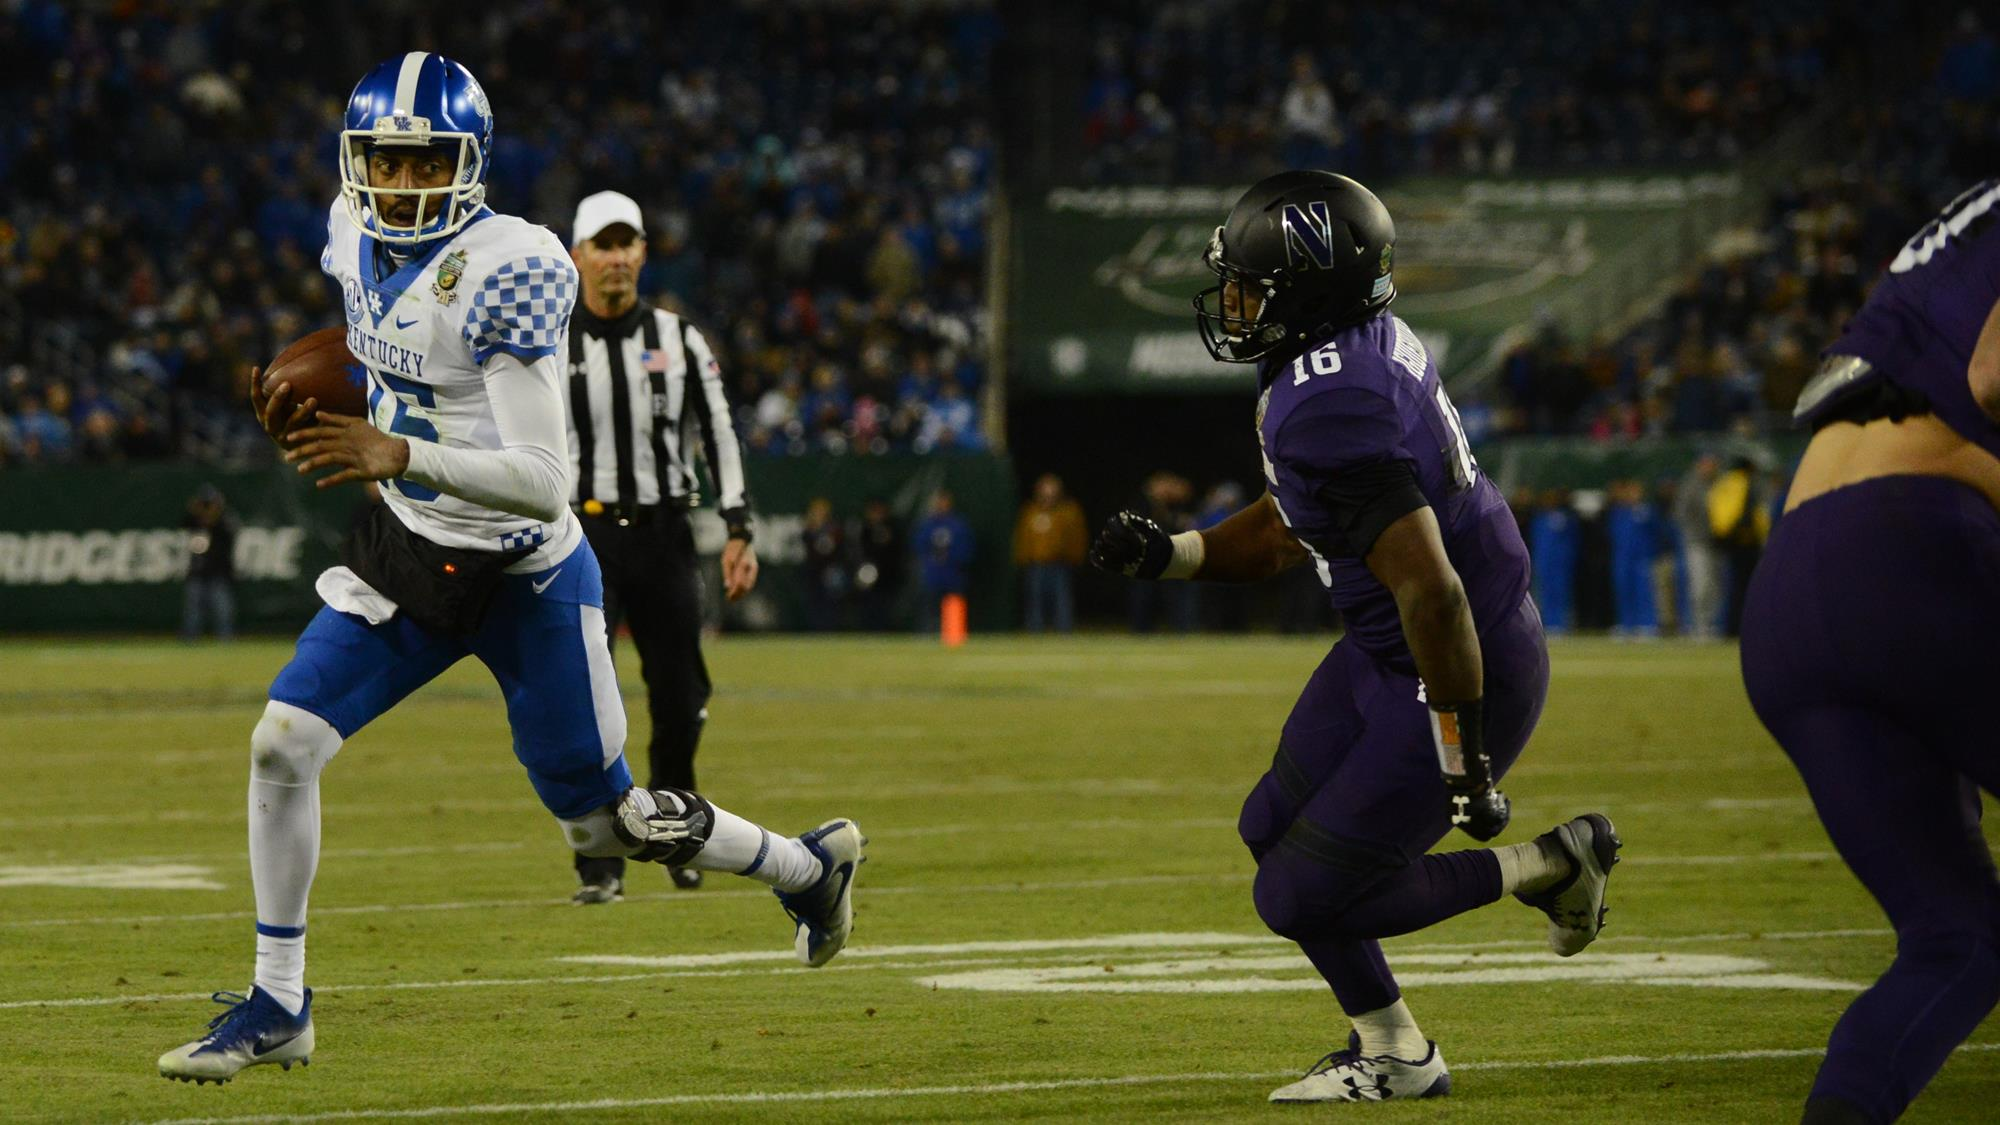 In Bowl Loss, UK Shows Fight Building the Program Demands